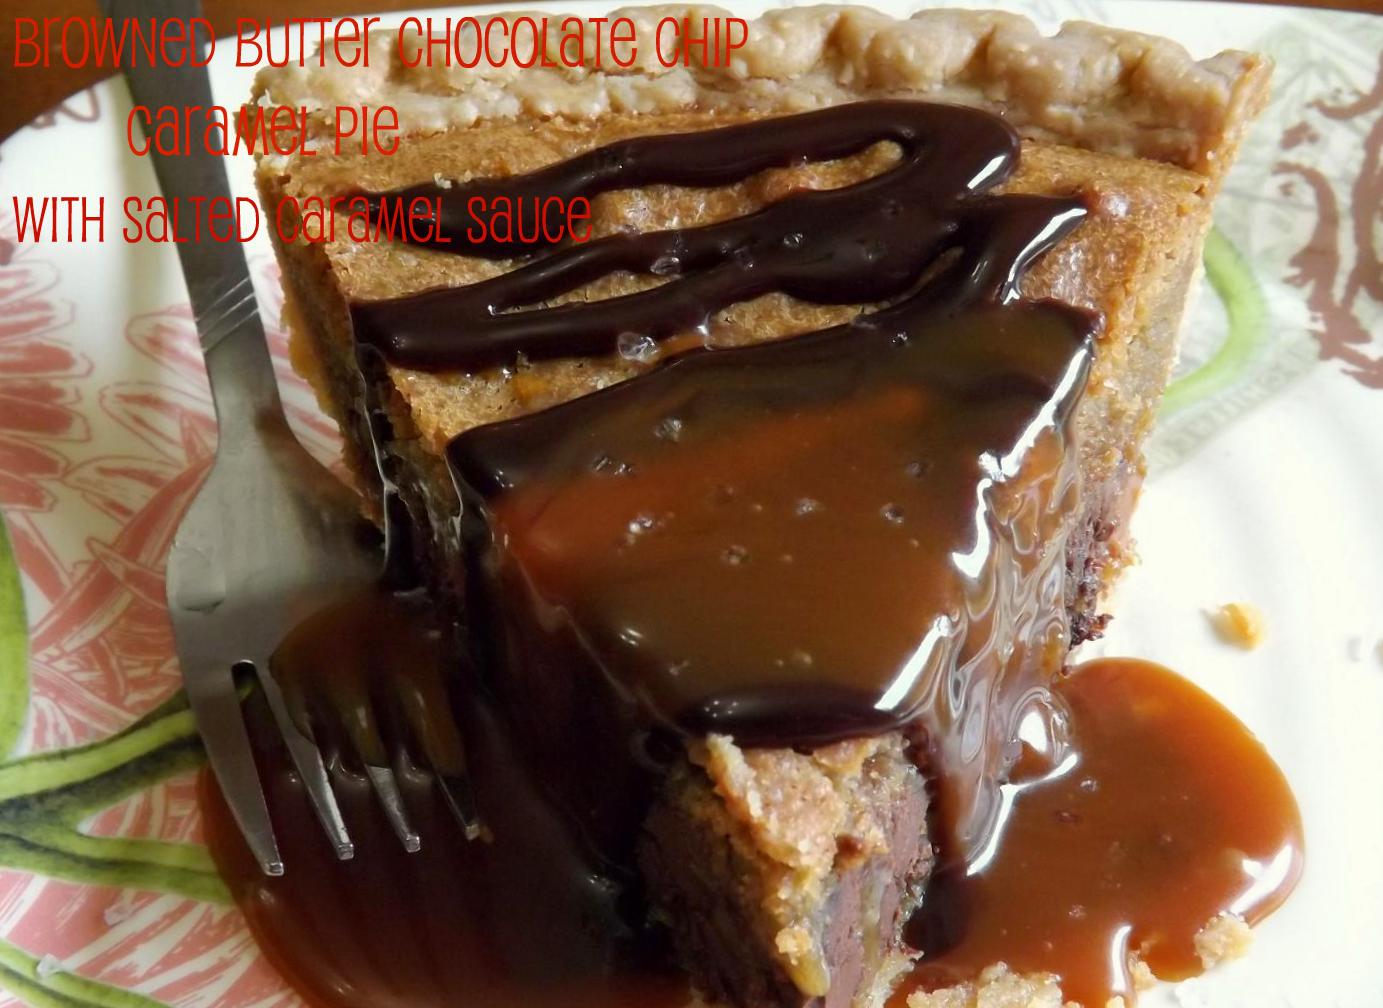 Browned Butter Chocolate Chip Cookie Pie With Salted Caramel Sauce-001